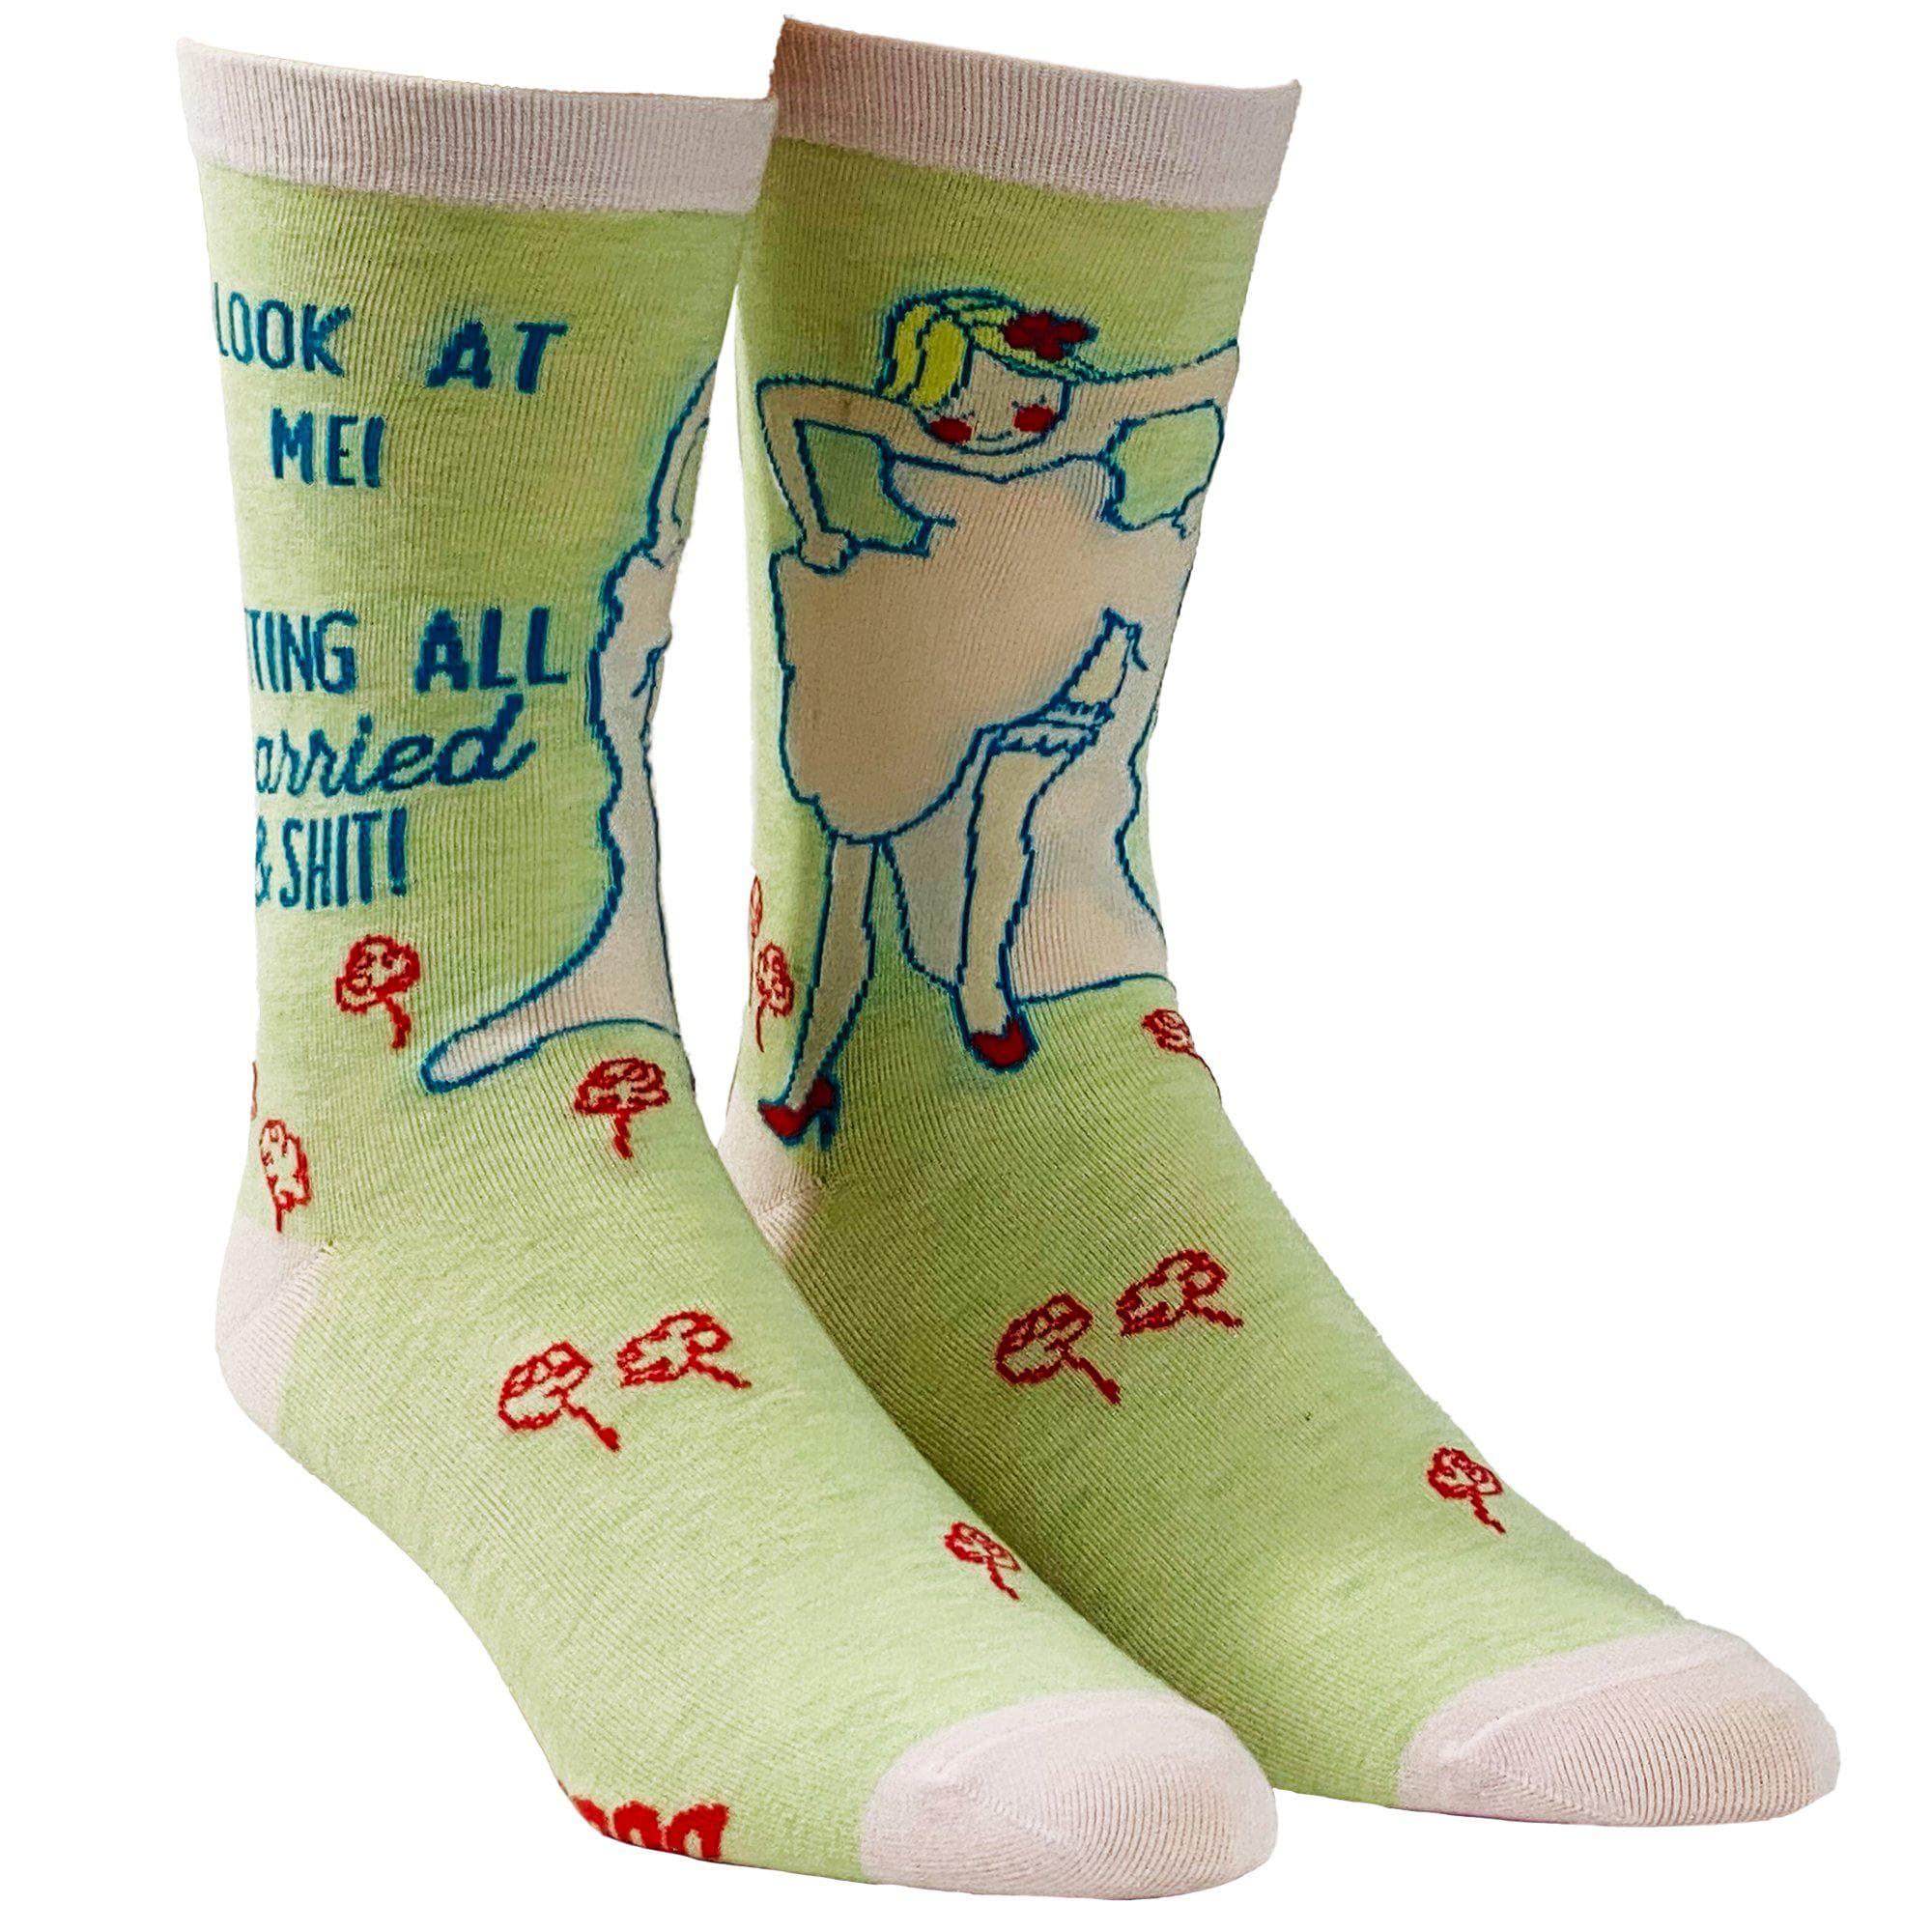 Women's Look At Me Getting All Married Socks - Crazy Dog T-Shirts